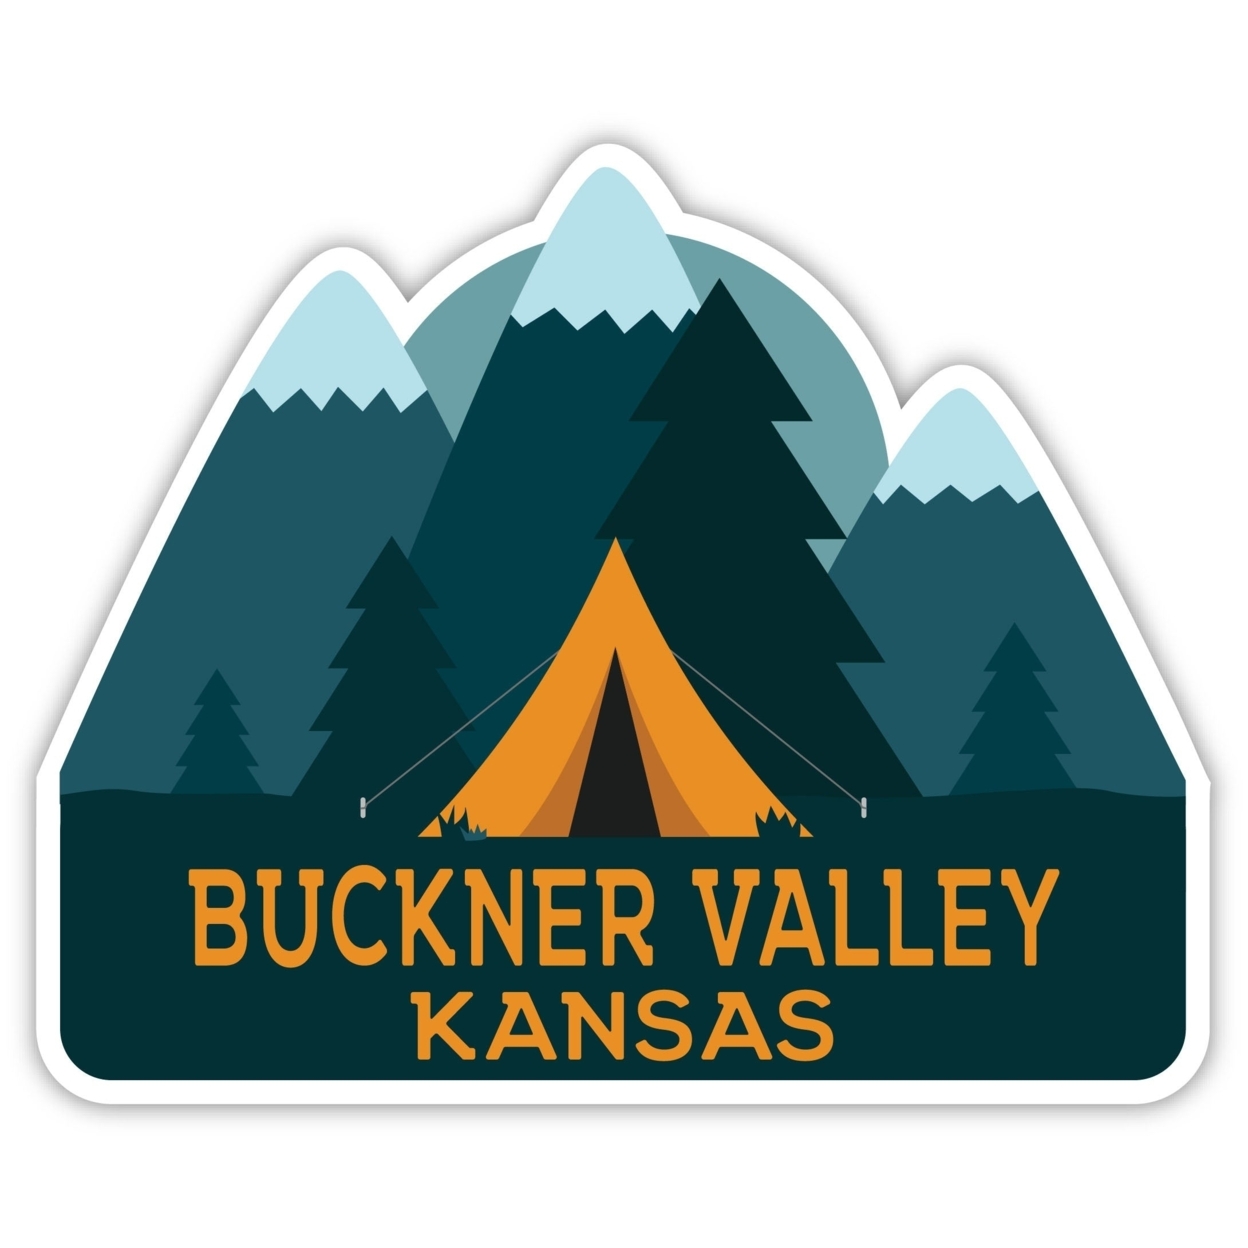 Buckner Valley Kansas Souvenir Decorative Stickers (Choose Theme And Size) - 4-Pack, 2-Inch, Tent